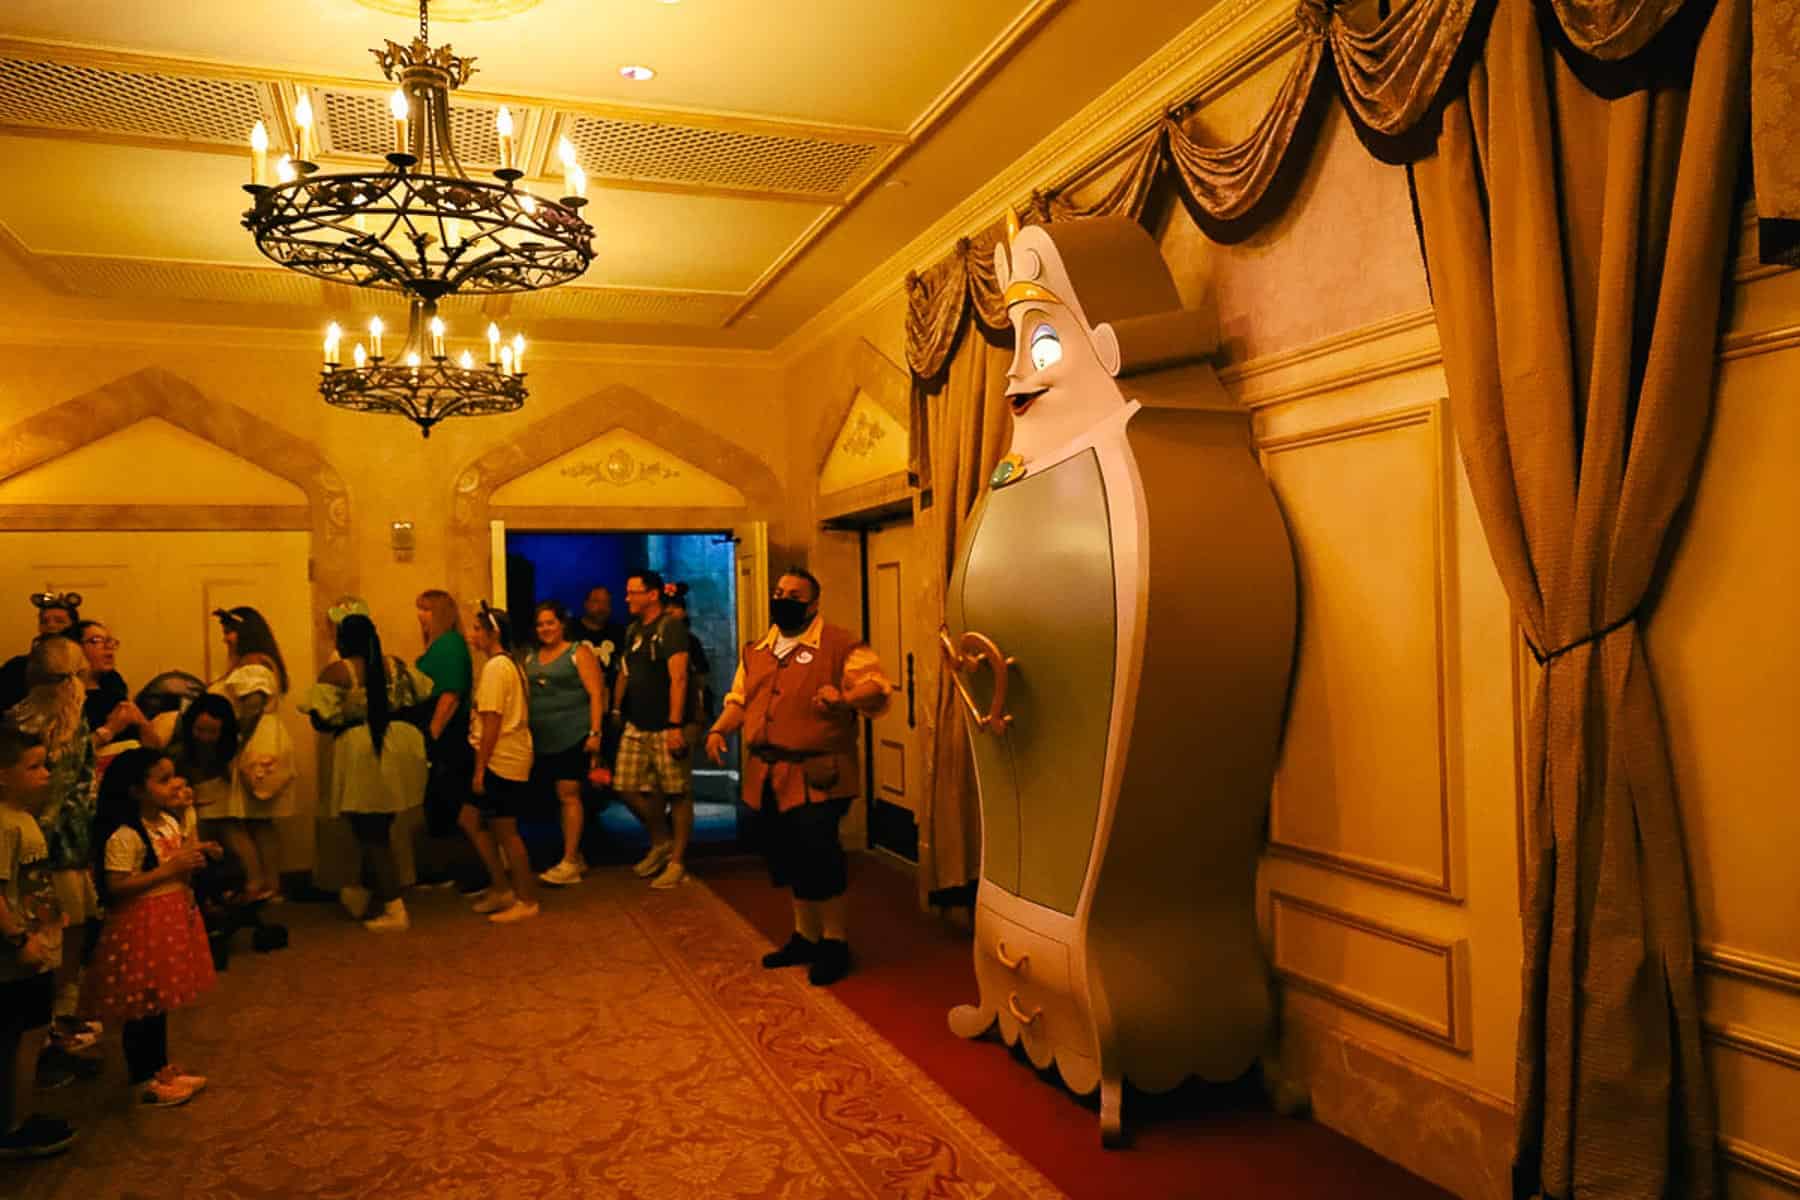 The enchanted wardrobe awaits guests inside the castle. 